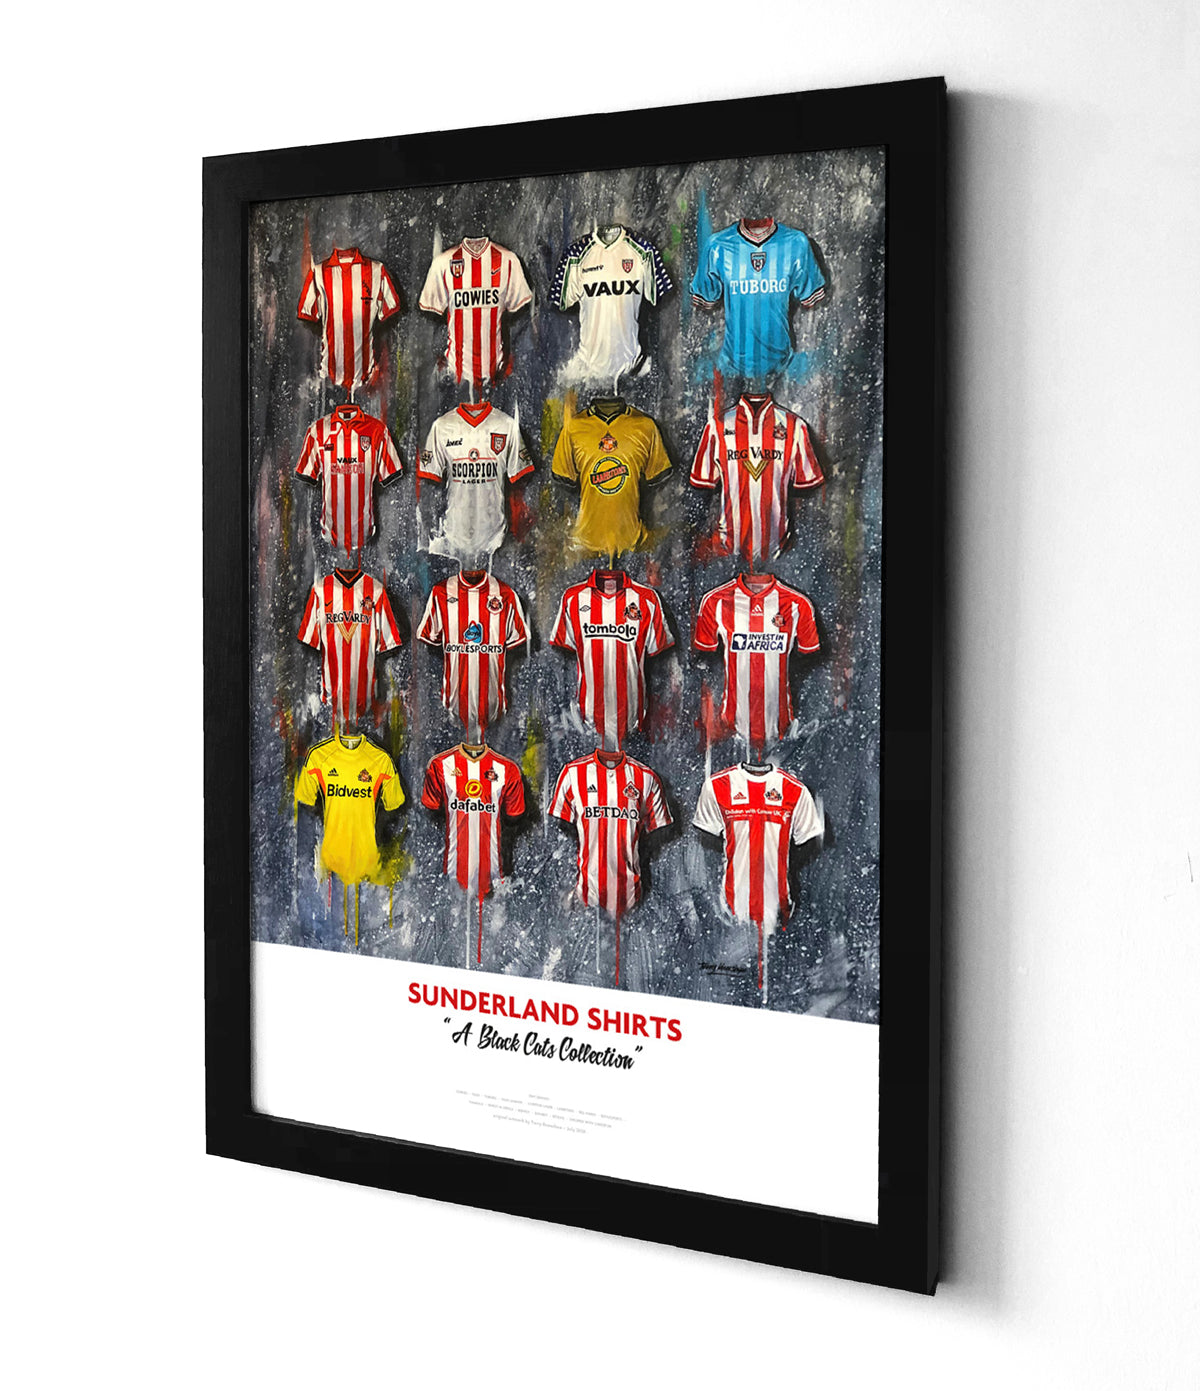 A limited edition A2 print by artist Terry Kneeshaw, featuring 16 iconic jerseys from the history of the Sunderland football team. The jerseys are arranged in a 4x4 grid pattern and are labeled with the corresponding year and design. The artwork has a vintage feel, with muted colors and a slightly distressed texture. The jerseys include classic designs such as the red and white striped shirt and the predominantly red shirt with a black stripe, as well as recent designs. Perfect for any Sunderland fan.